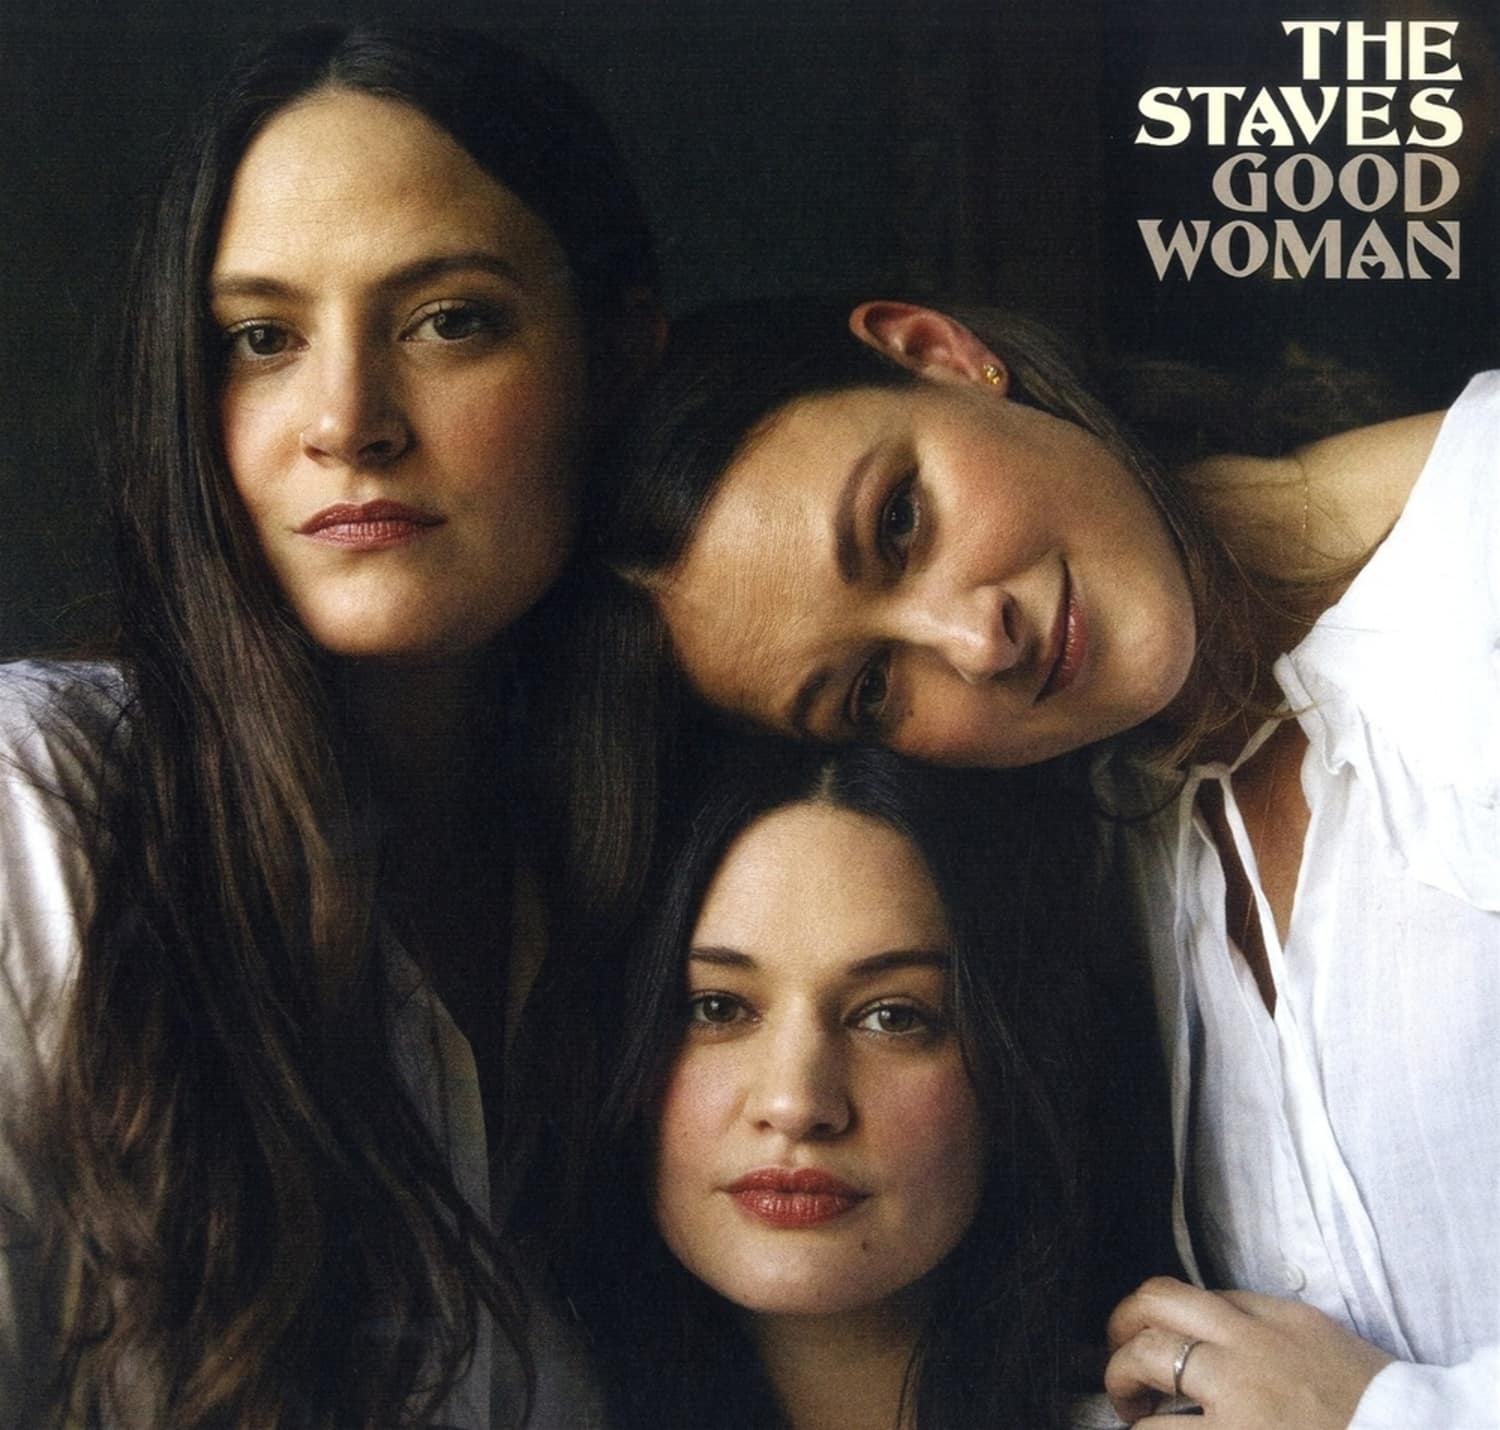 The Staves - GOOD WOMAN 